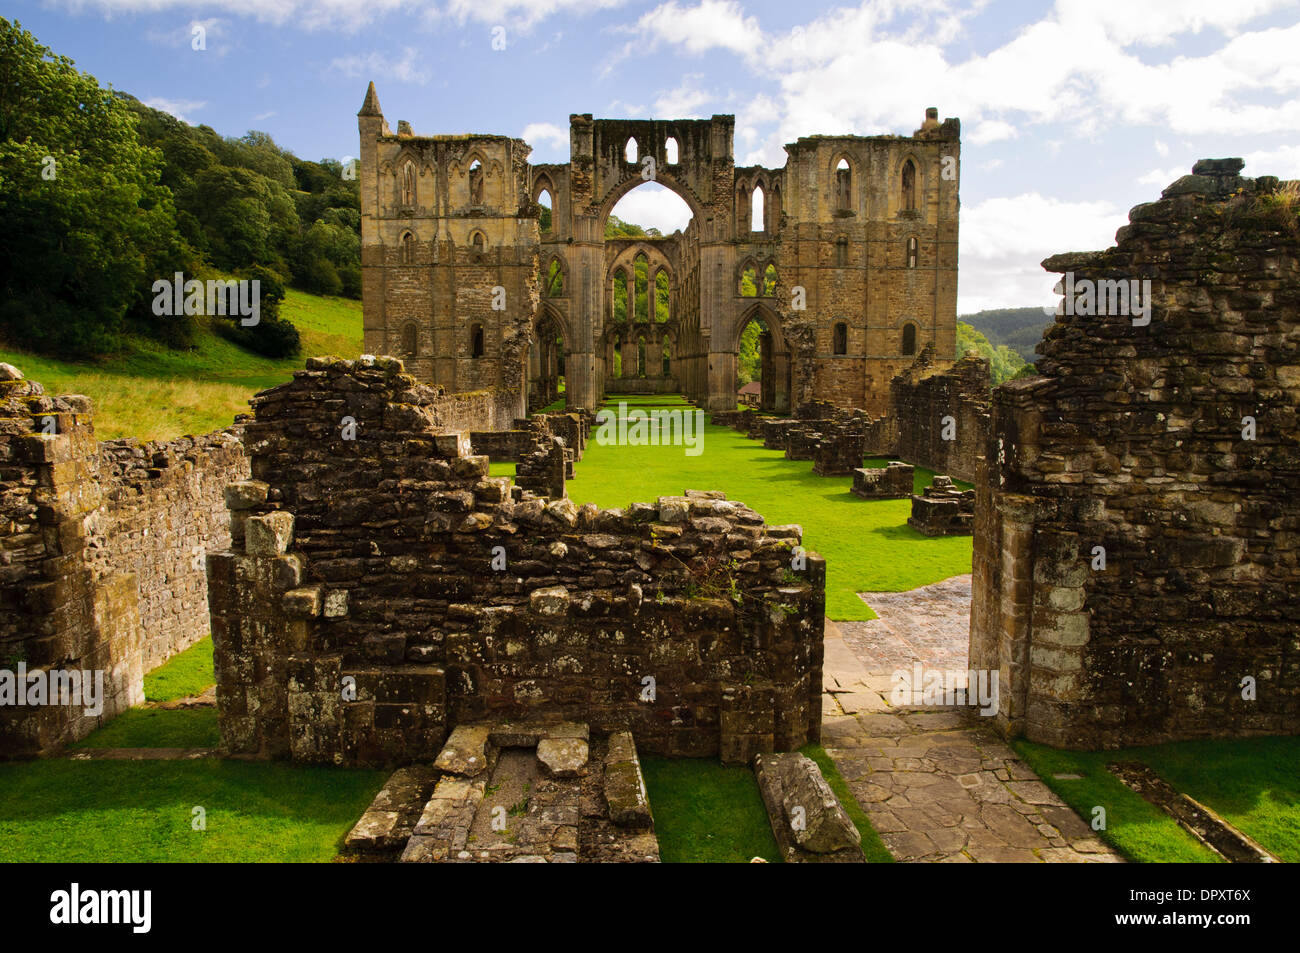 A view of the ruined abbey at Rievaulx in the North York Moors National park. September. Stock Photo